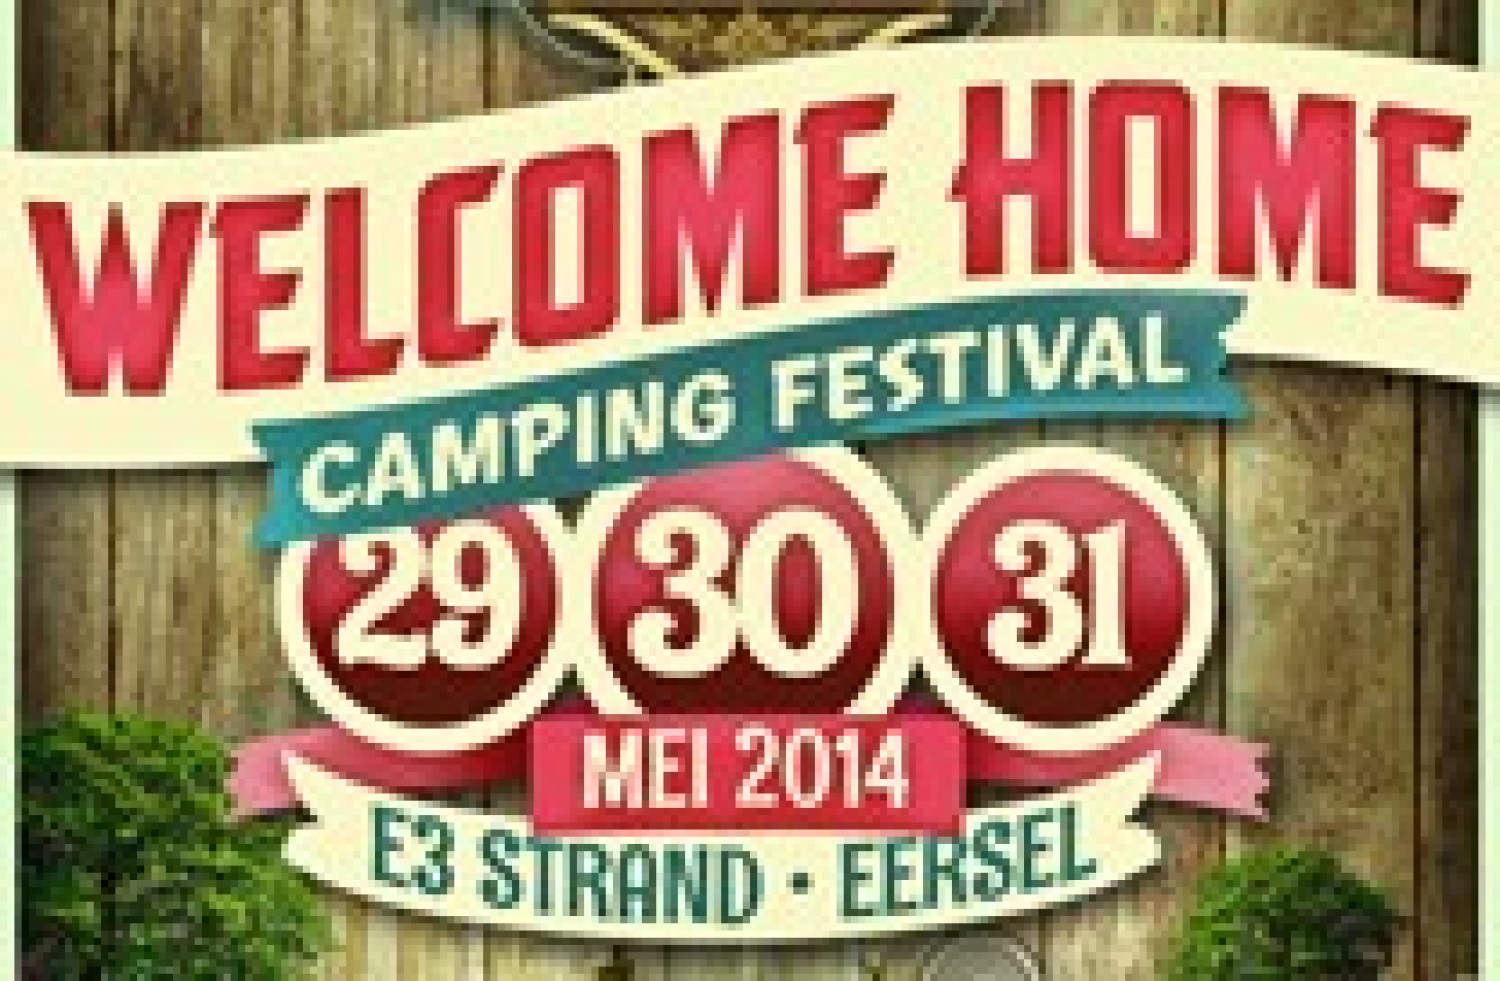 Party nieuws: Welcome Home Festival, 29-31 mei, E3-Strand in Eersel!